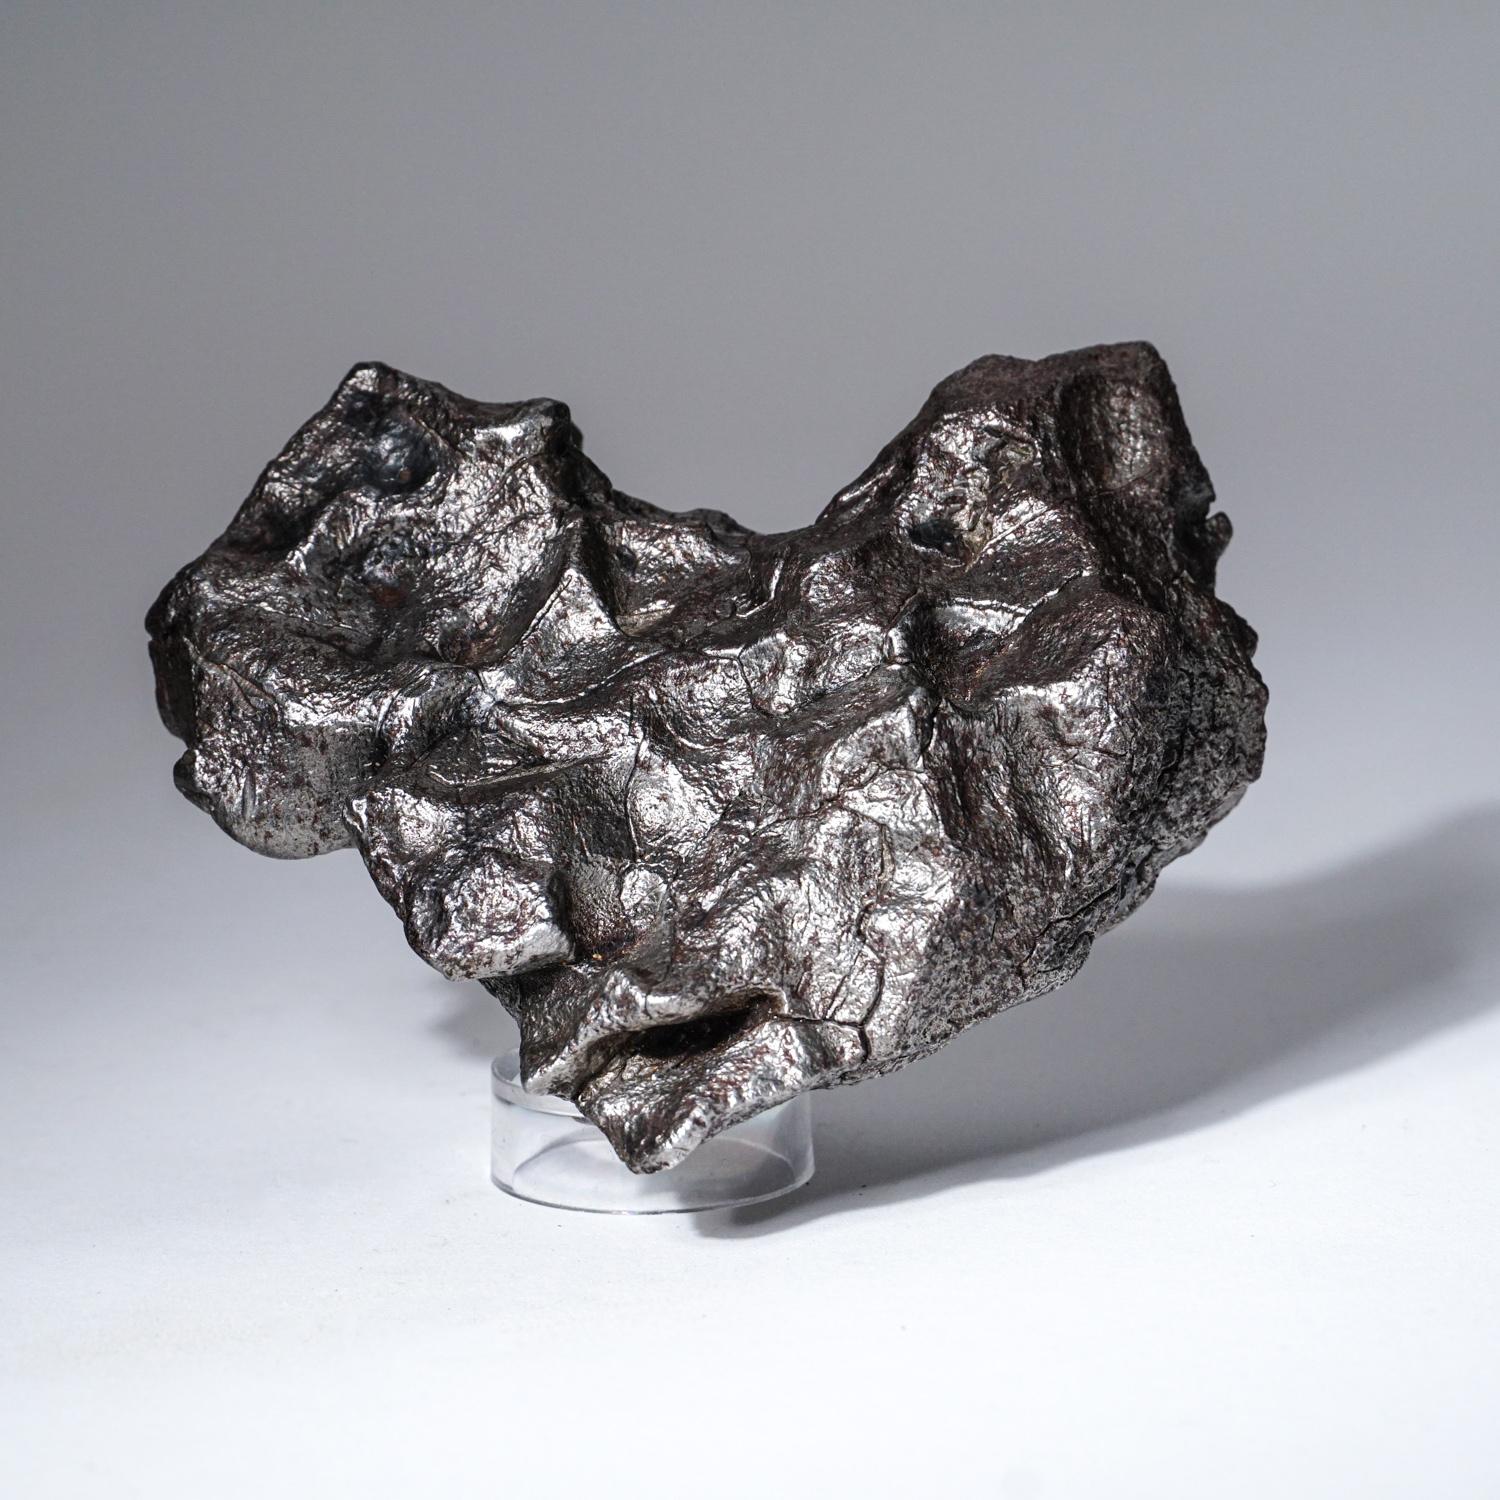 An iron meteorite fell on the Sikhote-Alin Mountains, in southeastern Russia, in 1947. Though large iron meteorite falls had been witnessed previously and fragments recovered, never before in recorded history had a fall of this magnitude been